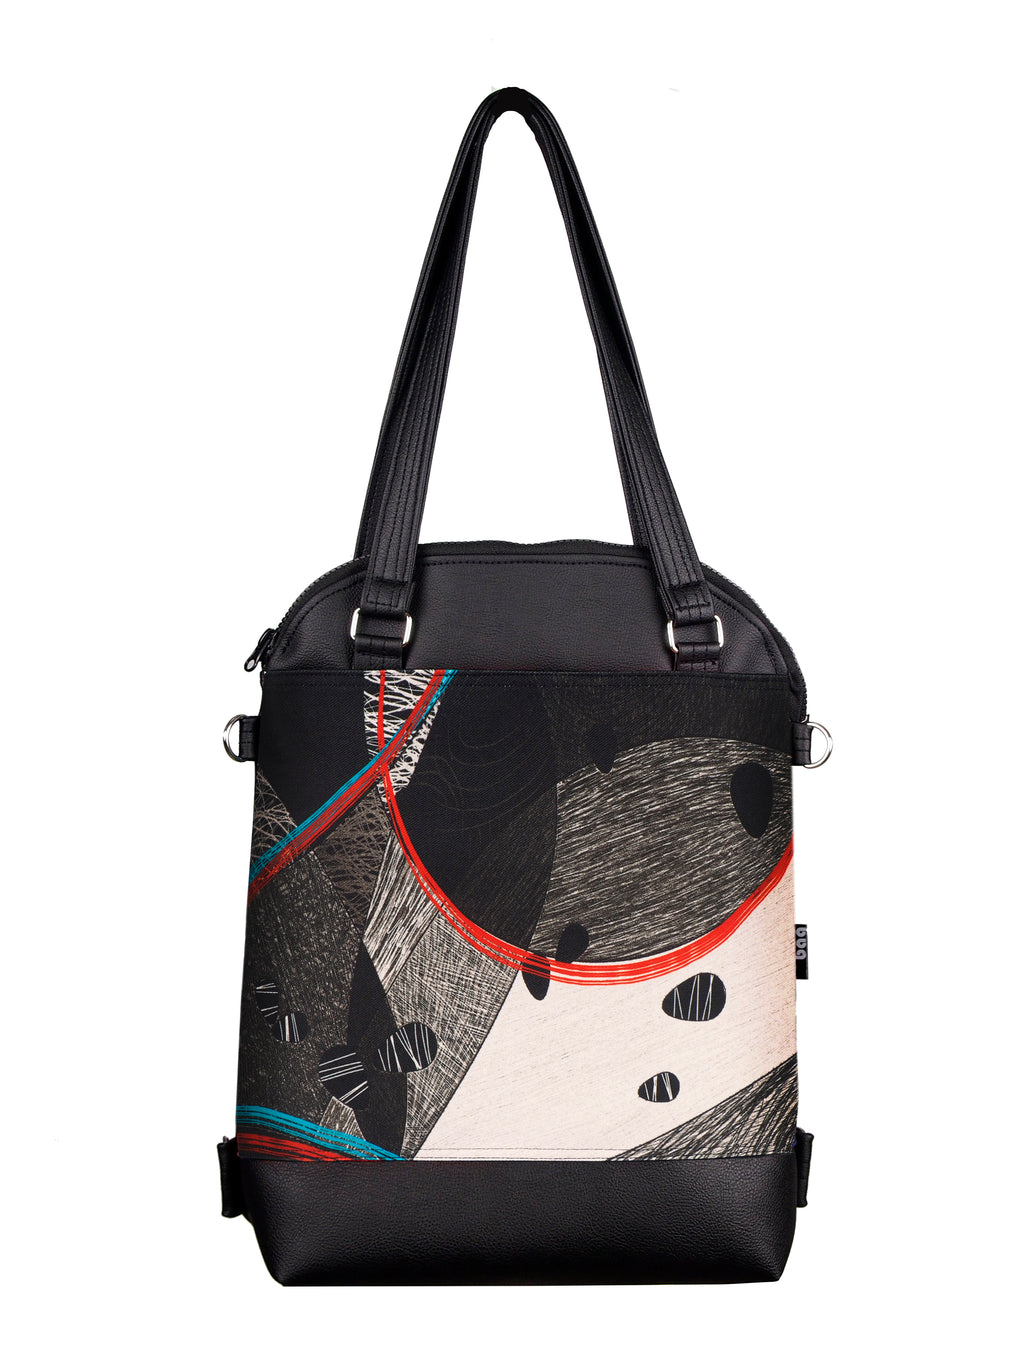 Bardo classic bag and backpack - Dance - Premium  from BARDO ART WORKS - Just lv89.00! Shop now at BARDO ART WORKS